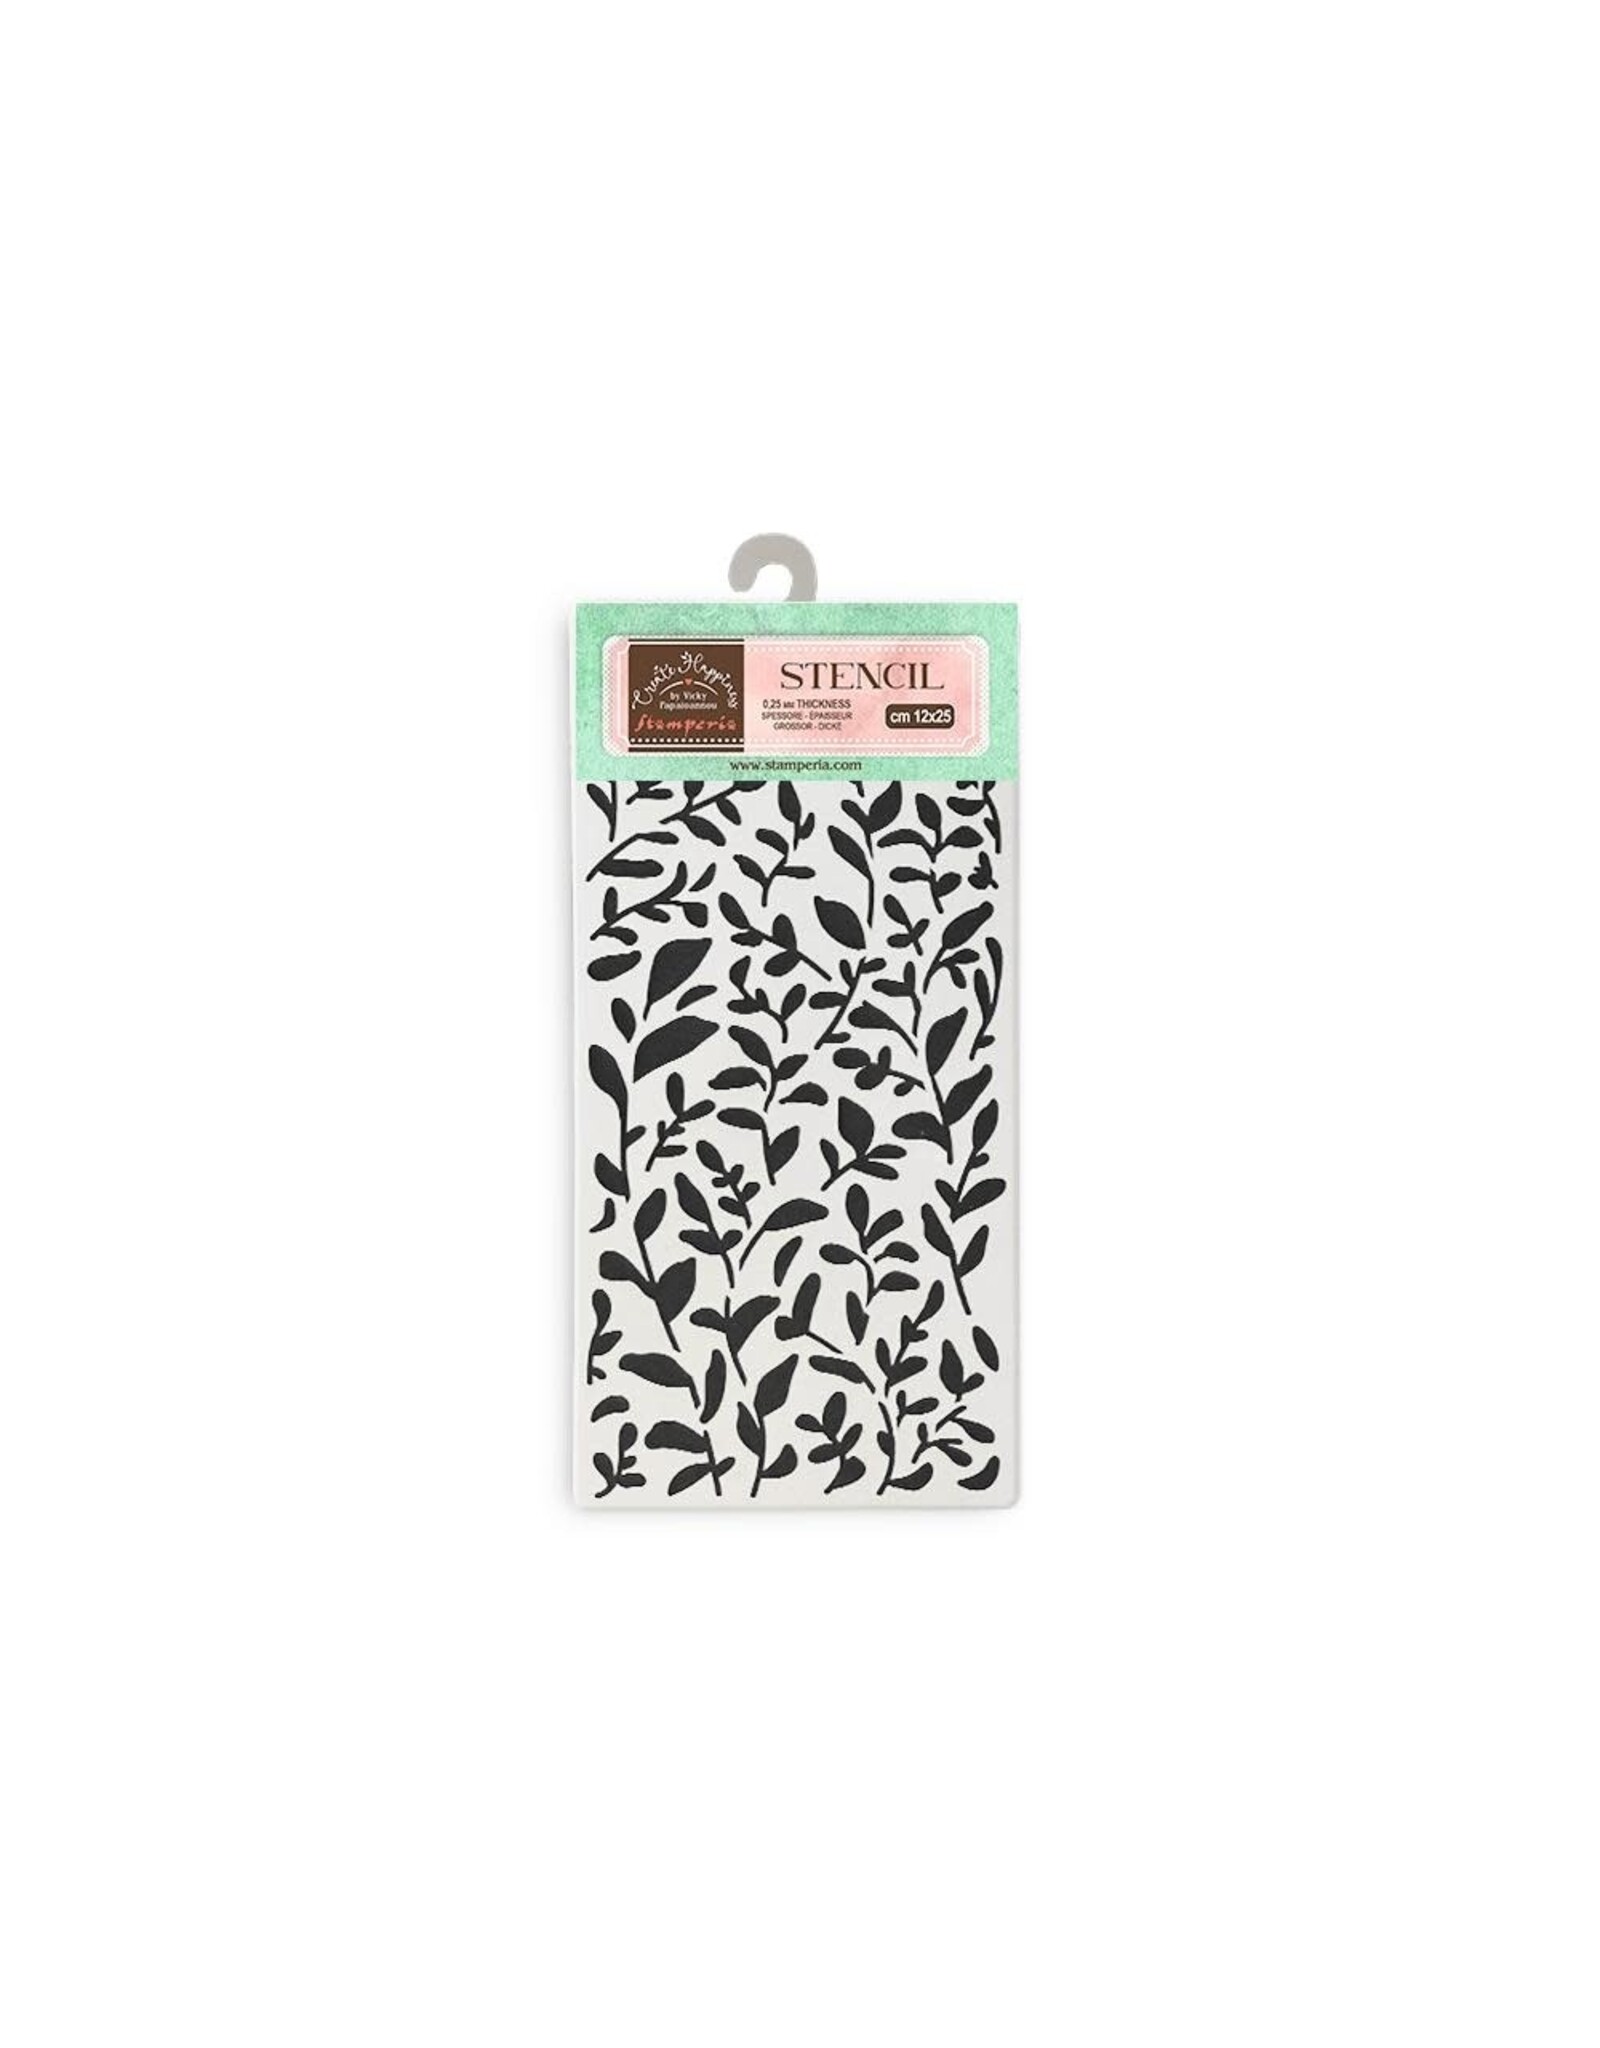 STAMPERIA STAMPERIA VICKY PAPAIOANNOU CREATE HAPPINESS SECRET DIARY LEAVES PATTERN STENCIL